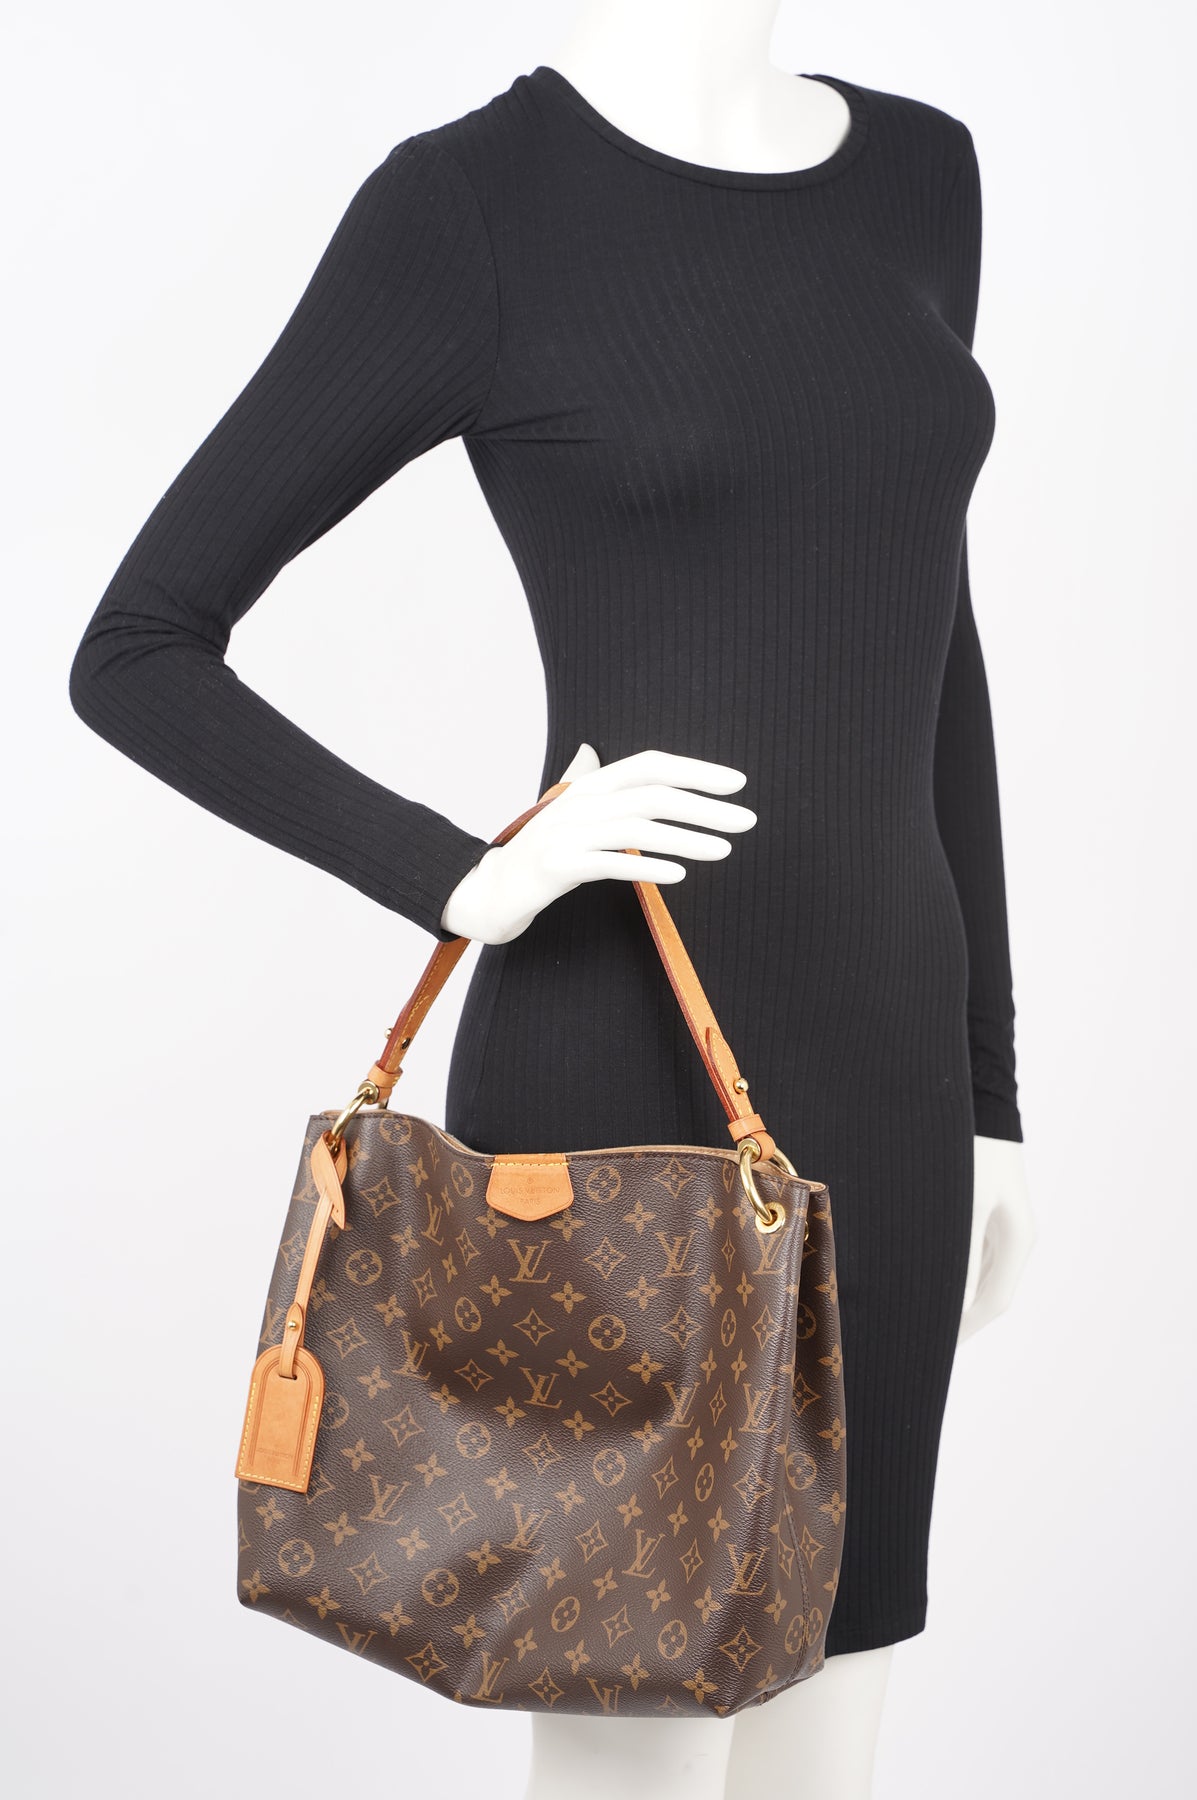 Reveal Louis Vuitton Graceful PM in Monogram and Peony 